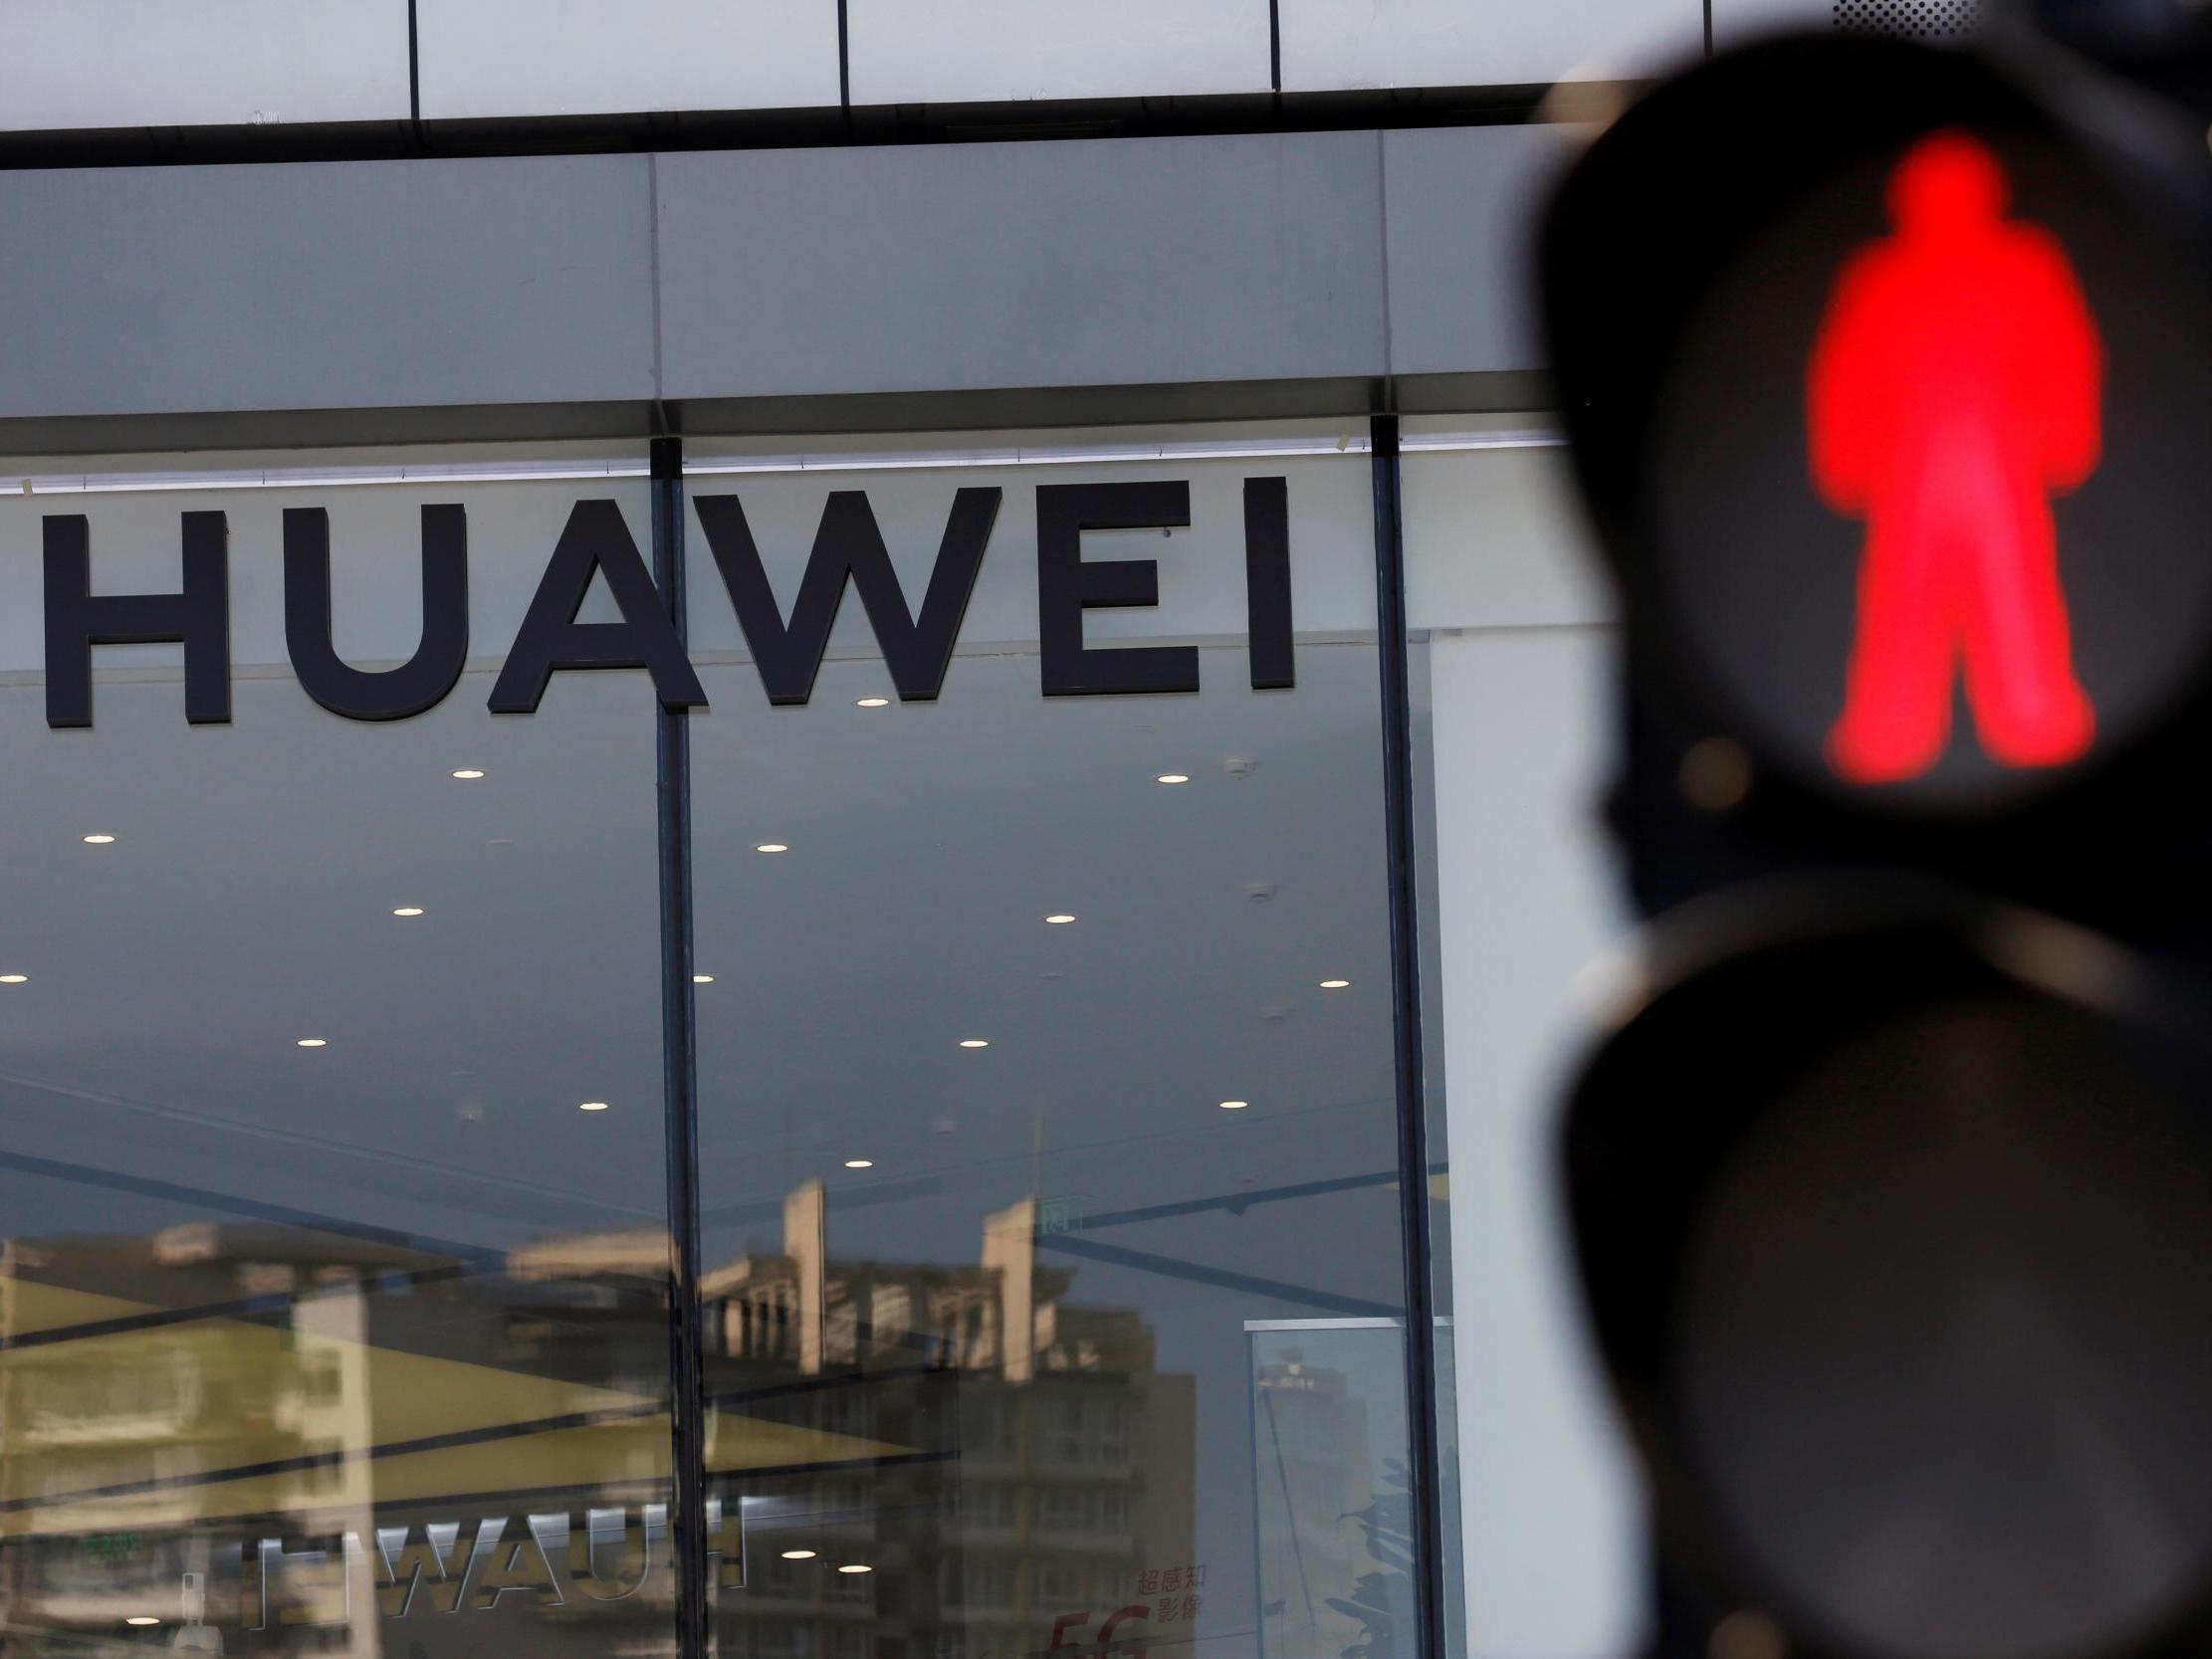 American measures have crippled Huawei's ability to be a reliable supplier to the UK, experts say